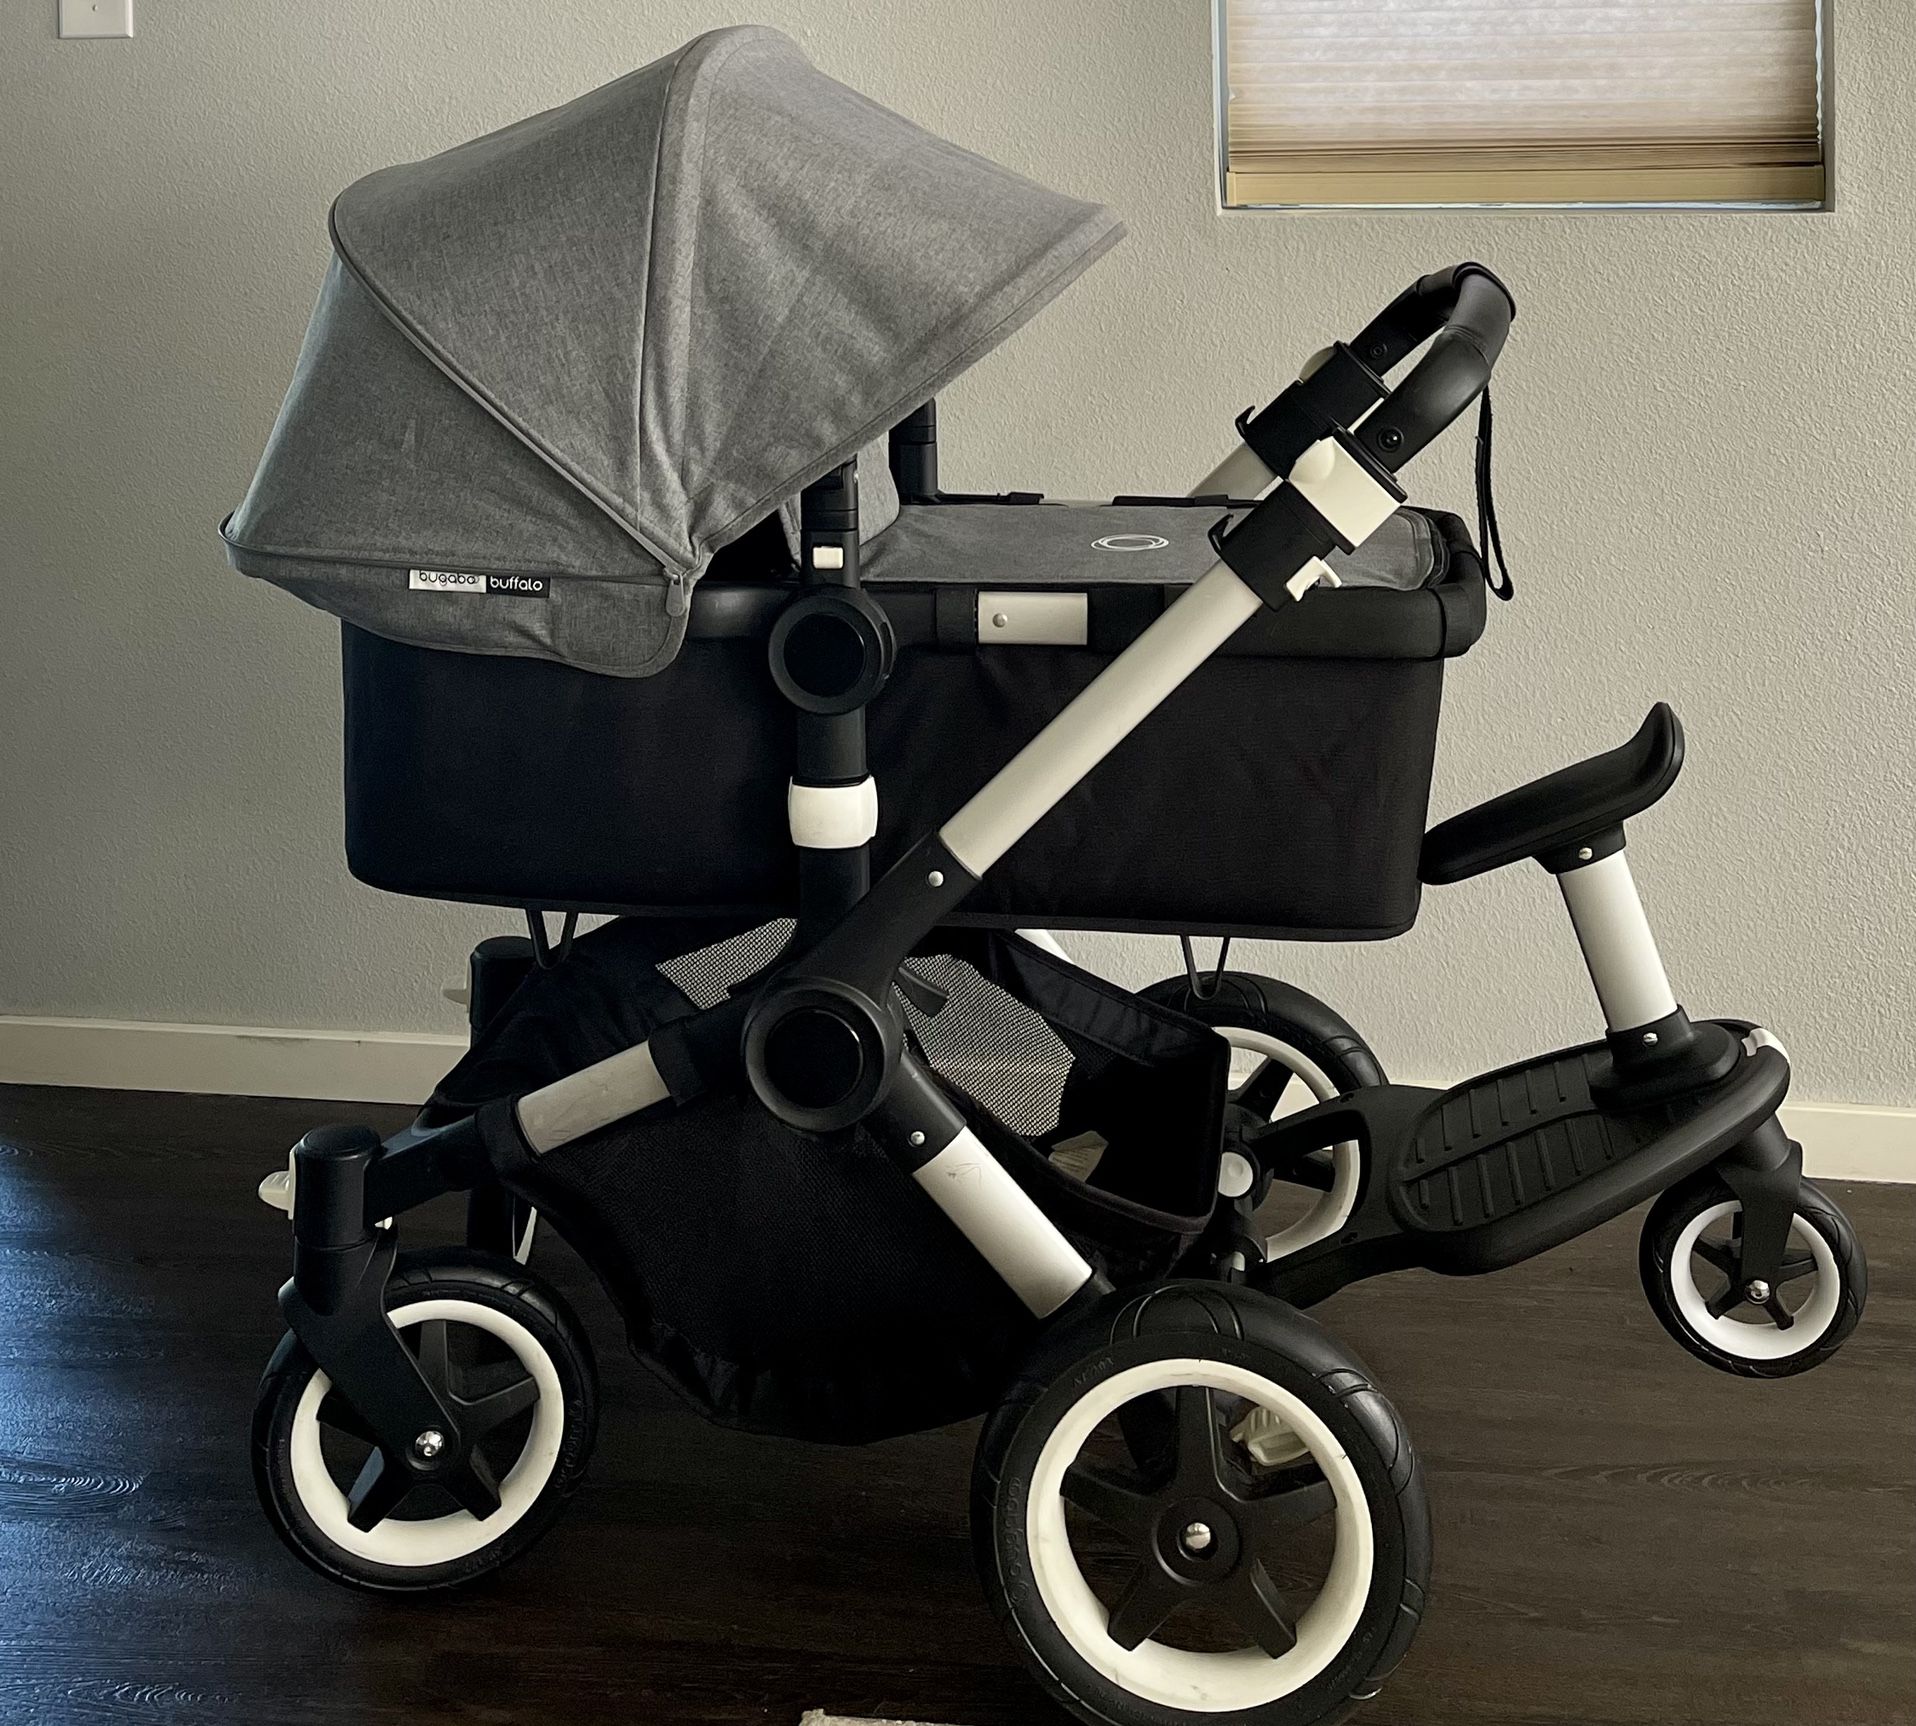 svag Give At blokere Bugaboo Buffalo Stroller with Grey Melange Fabric for Sale in Covington, WA  - OfferUp